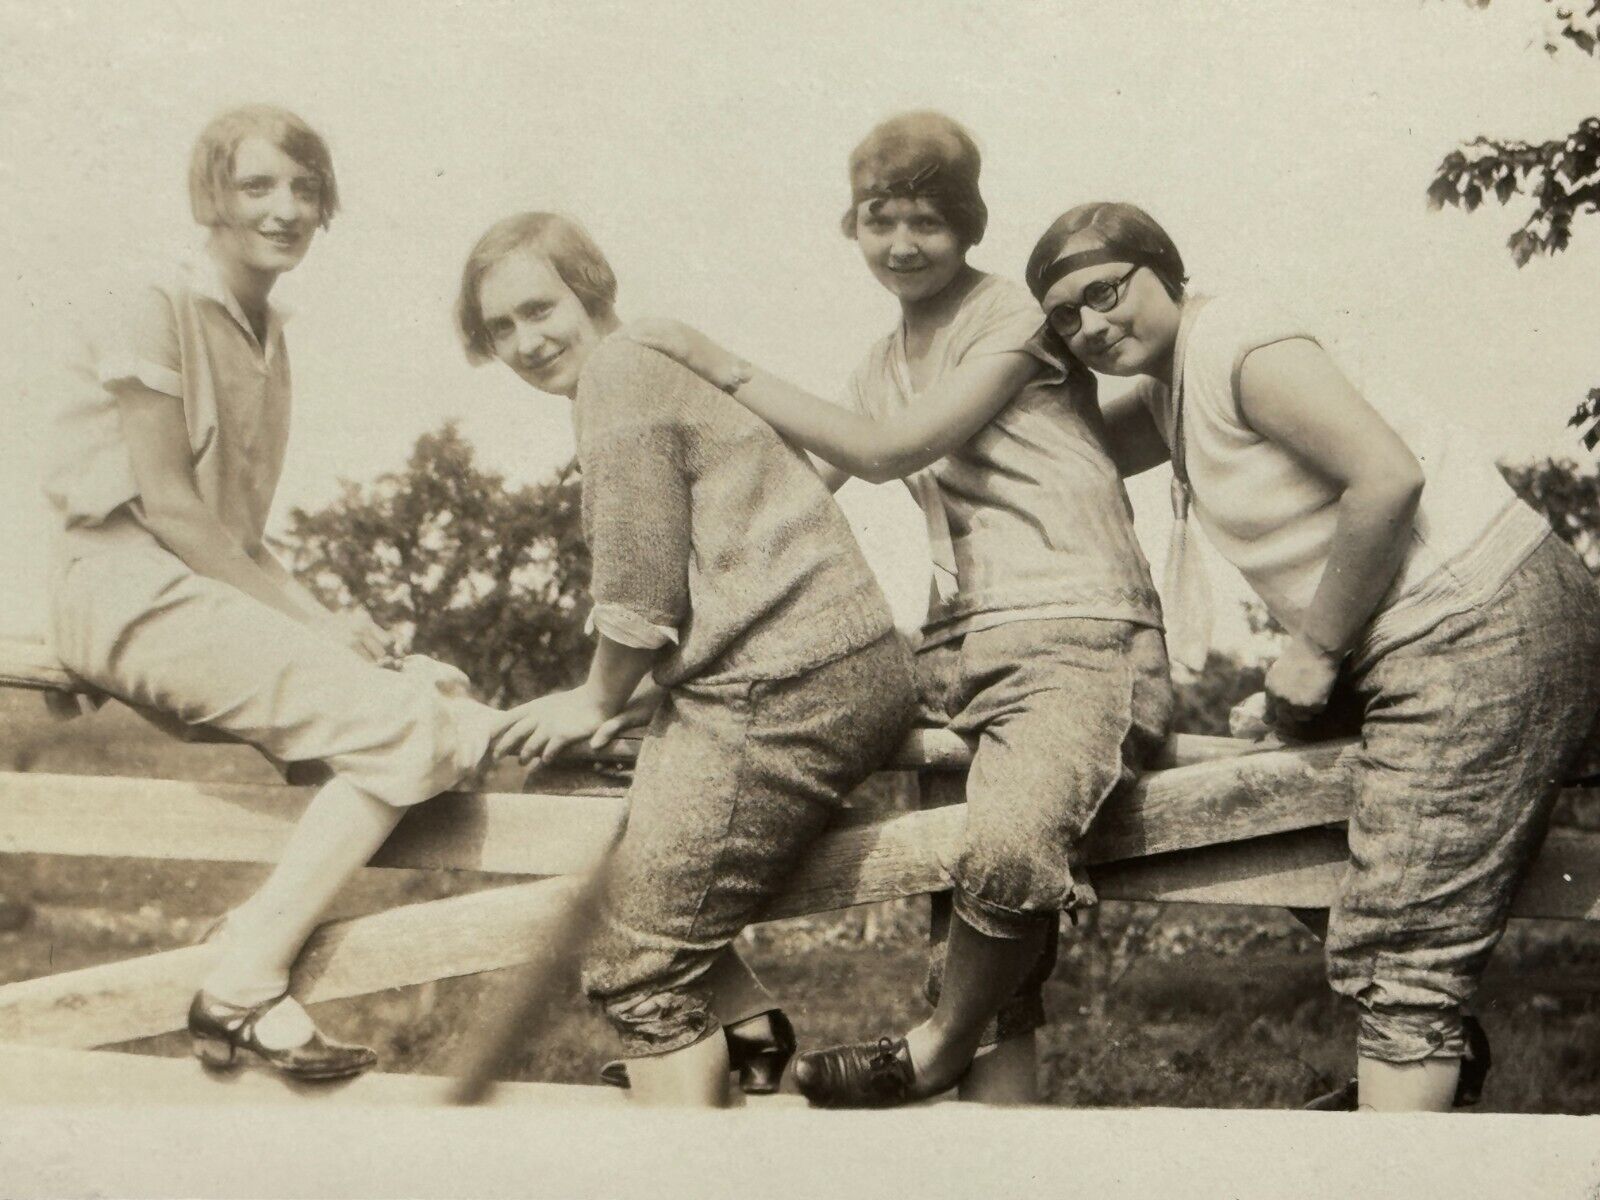 1N Photograph Cute Group 4 Women Ladies Sitting On Wood Fence 1920's Country